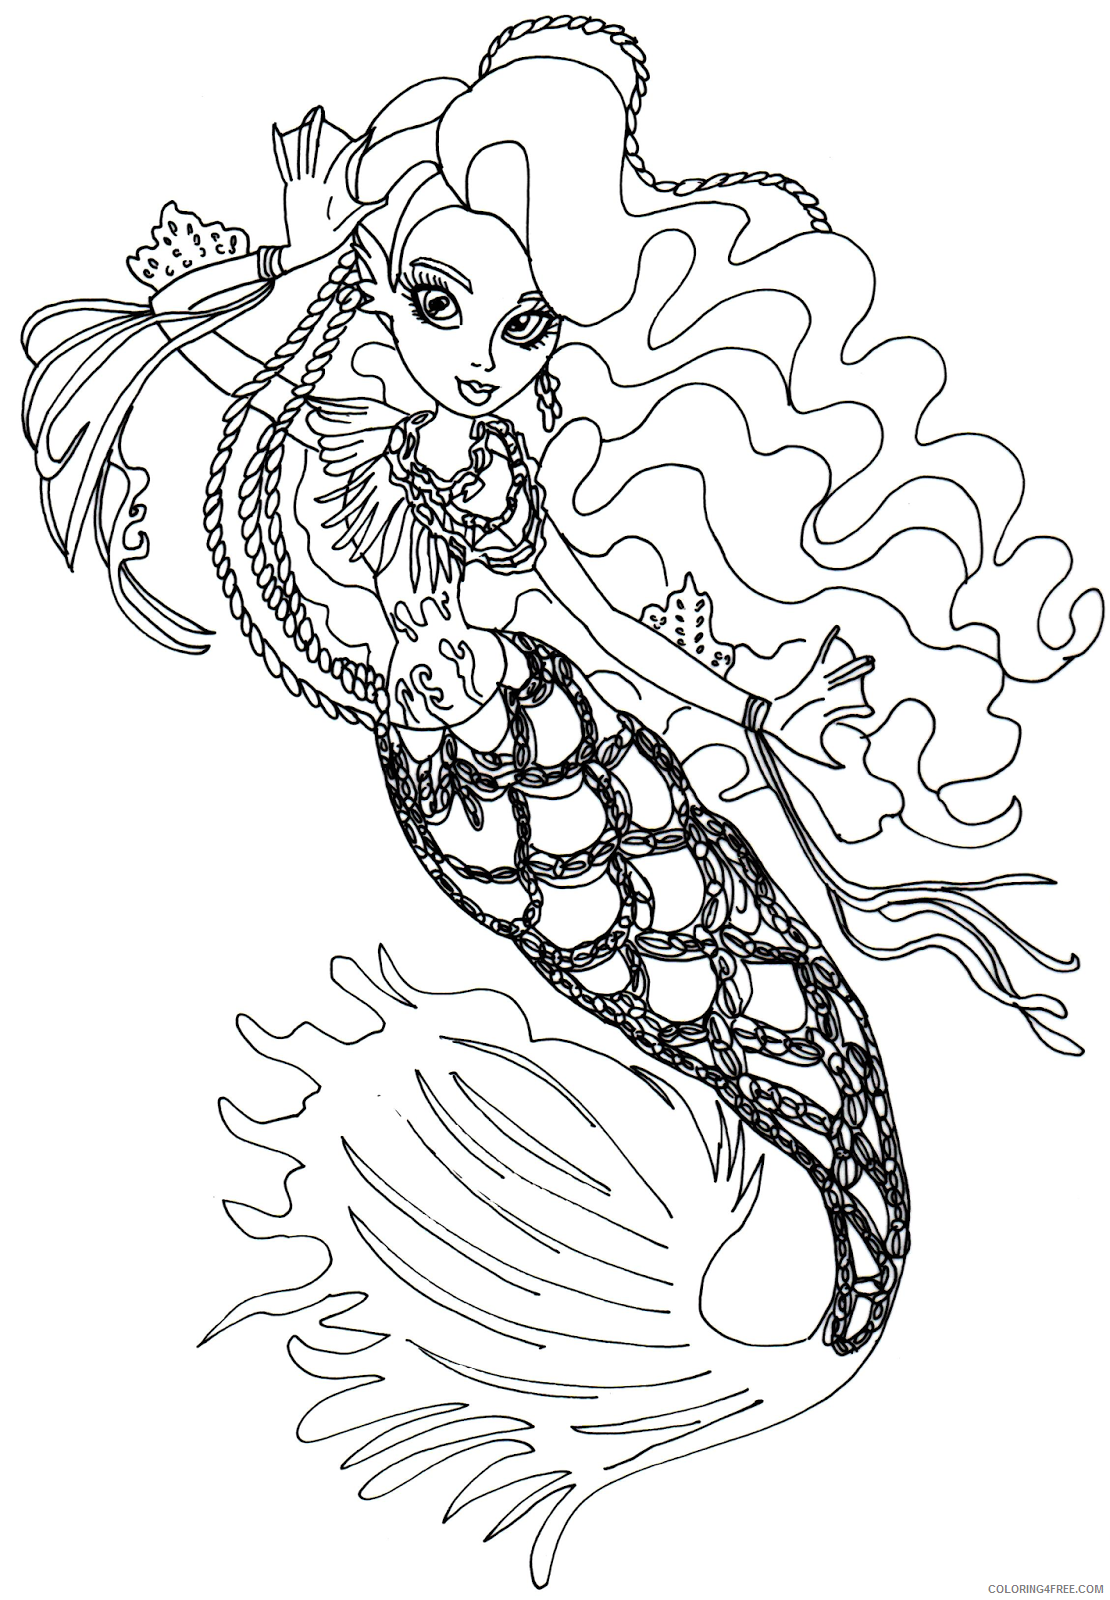 monster high sirena von boo coloring pages Coloring4free